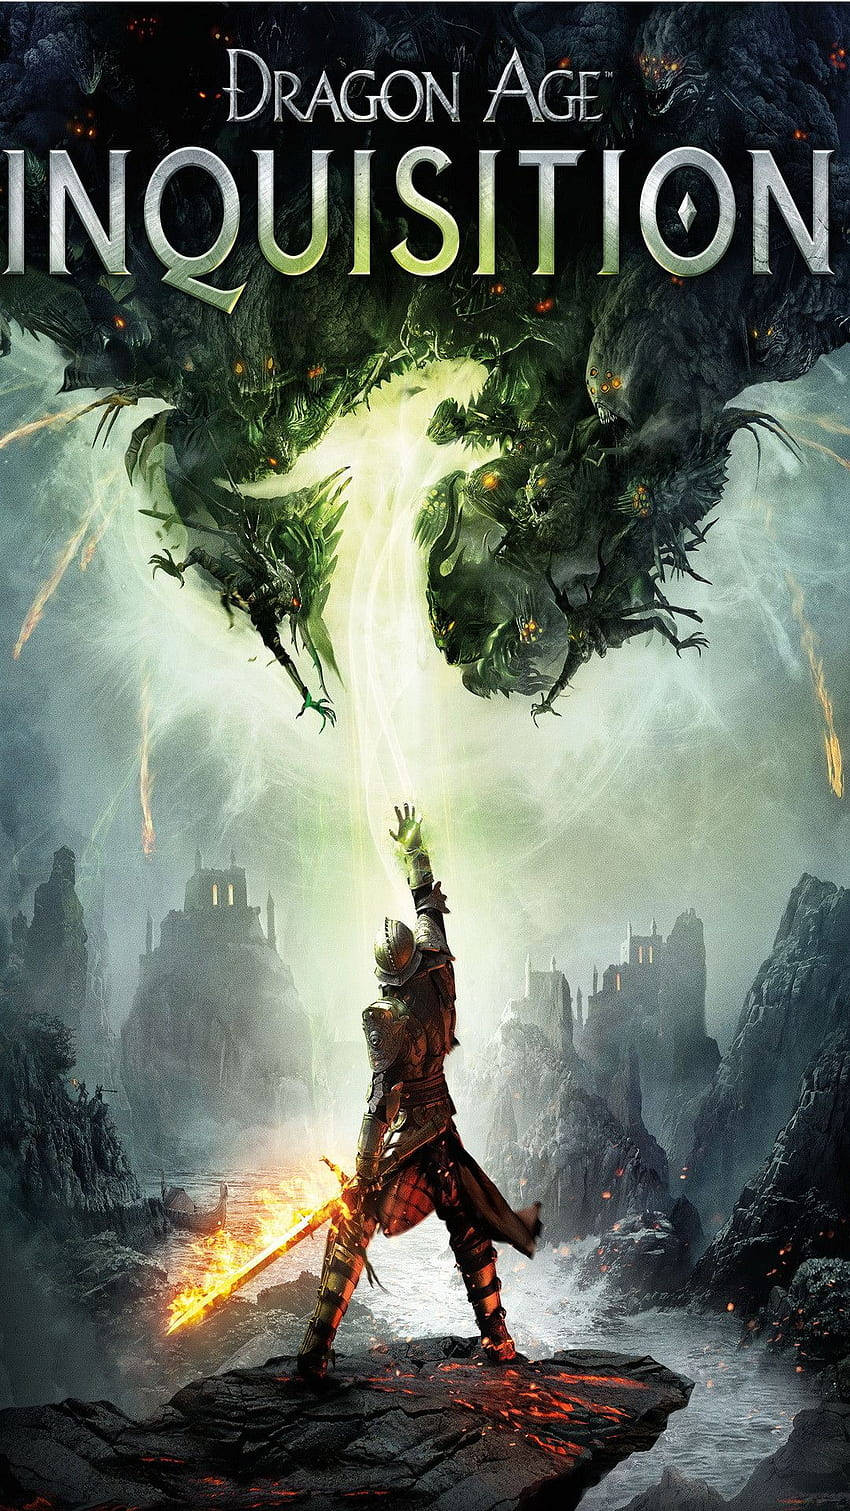 Dive deeper into the world of Dragon Age with the Dragon Age Phone Wallpaper